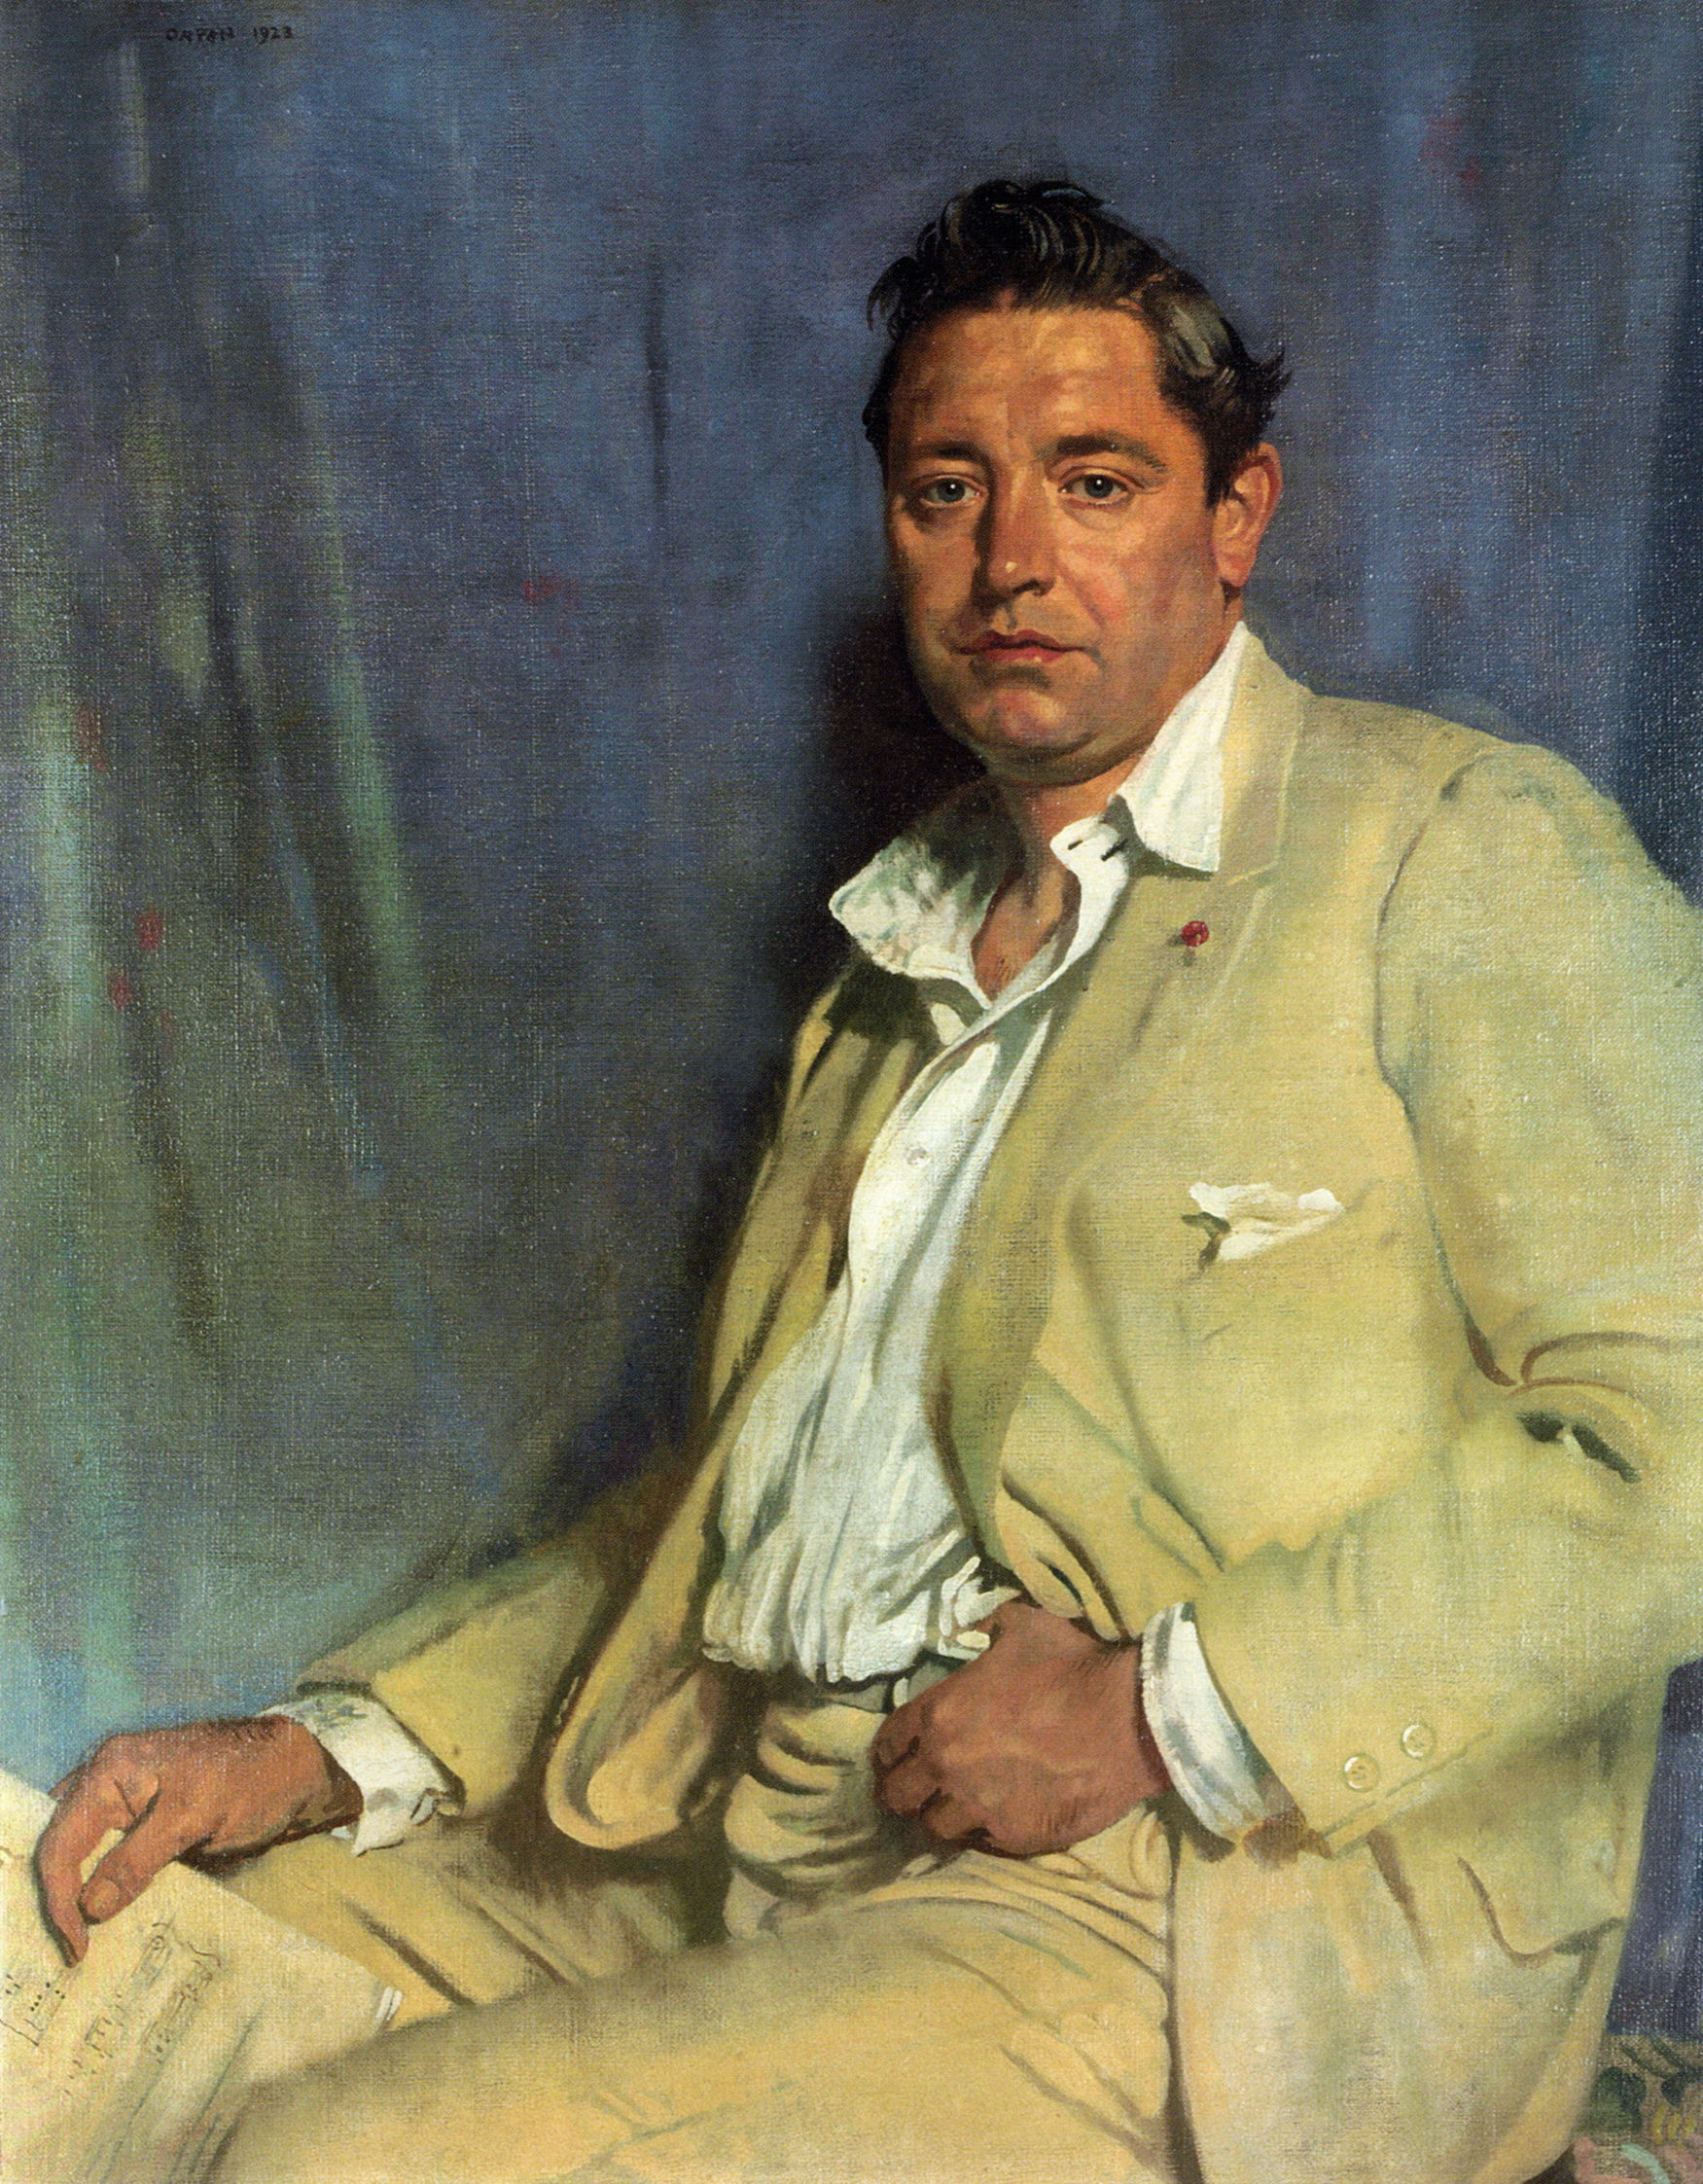 Count John McCormack by Sir William Newenham Montague Orpen